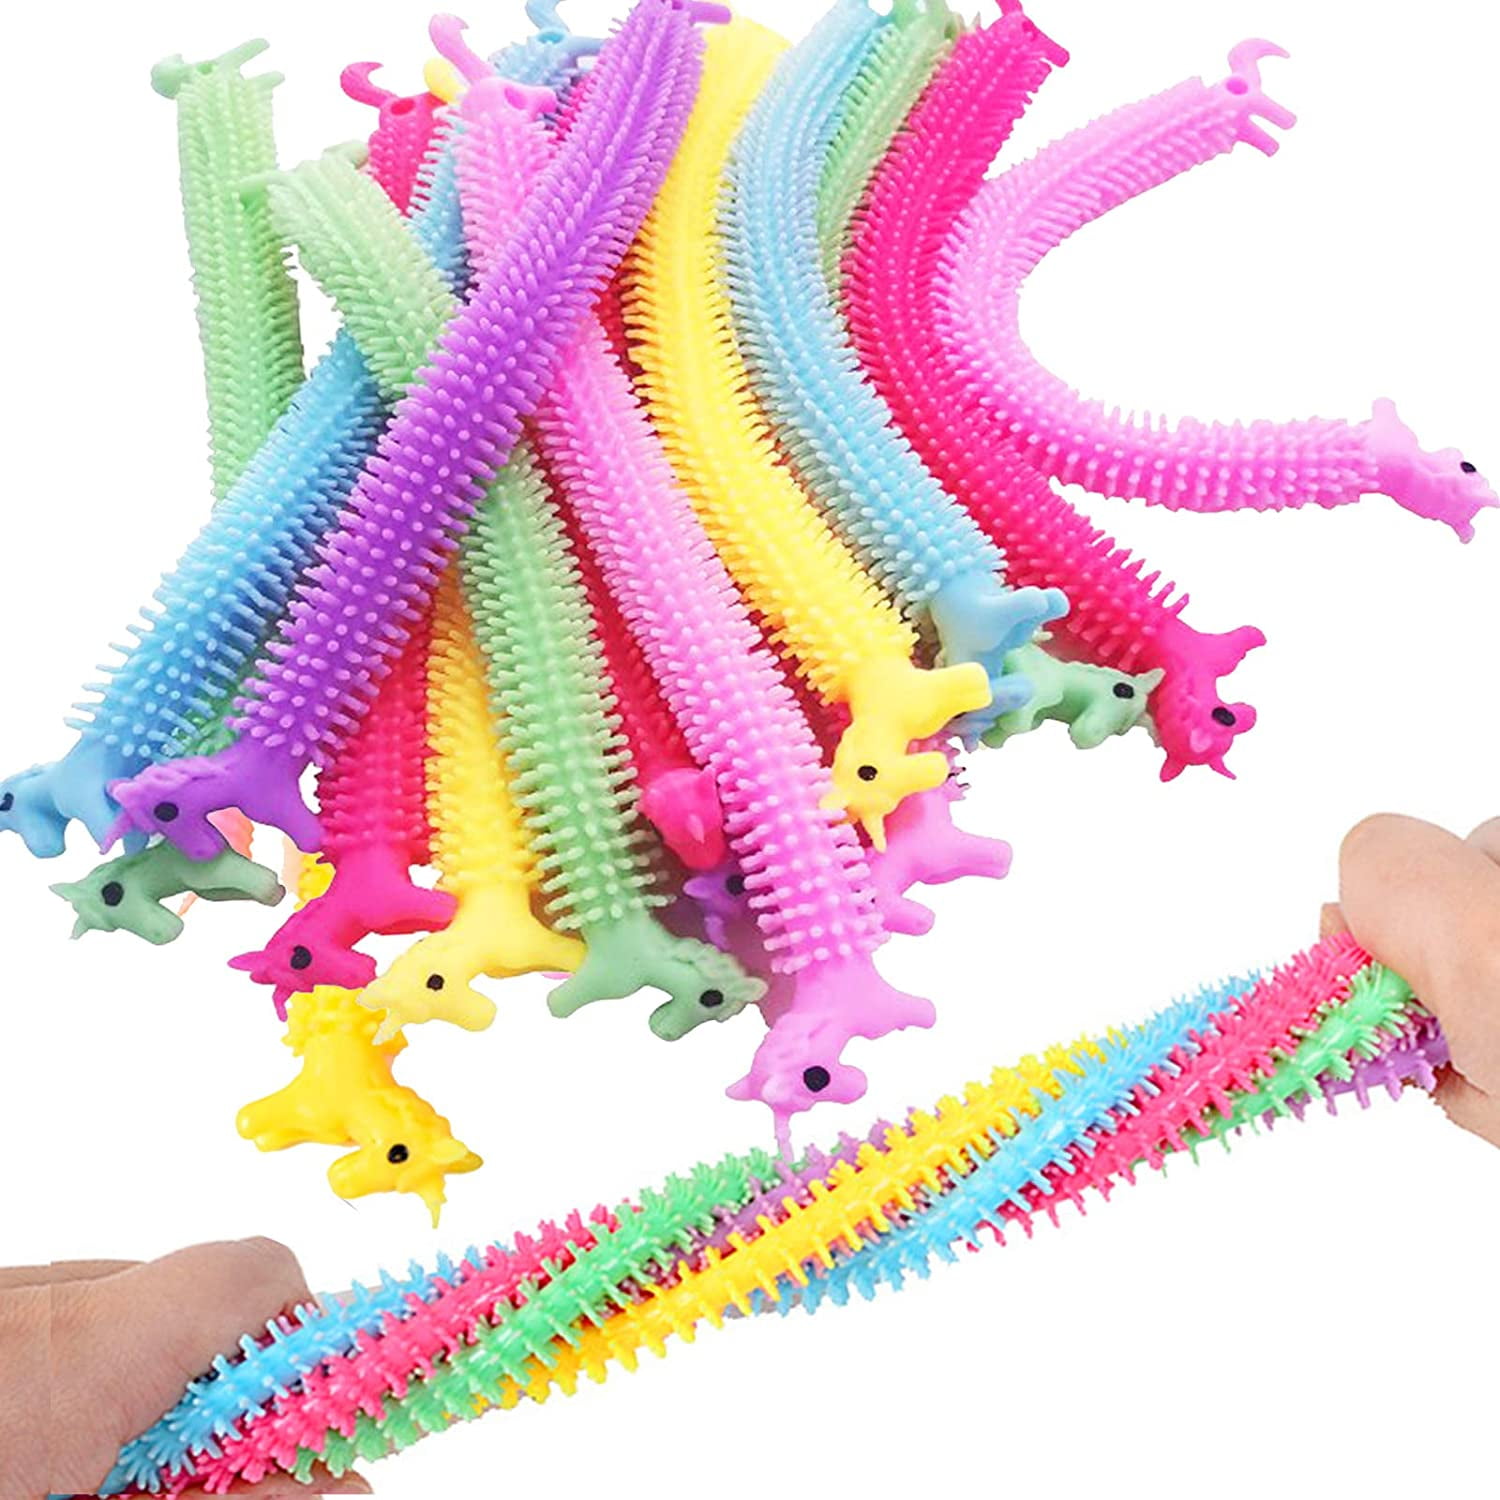 Details about   Stretch Caterpillar Fidget Wooden Worm ADHD Autism Stocking Filler Education Toy 